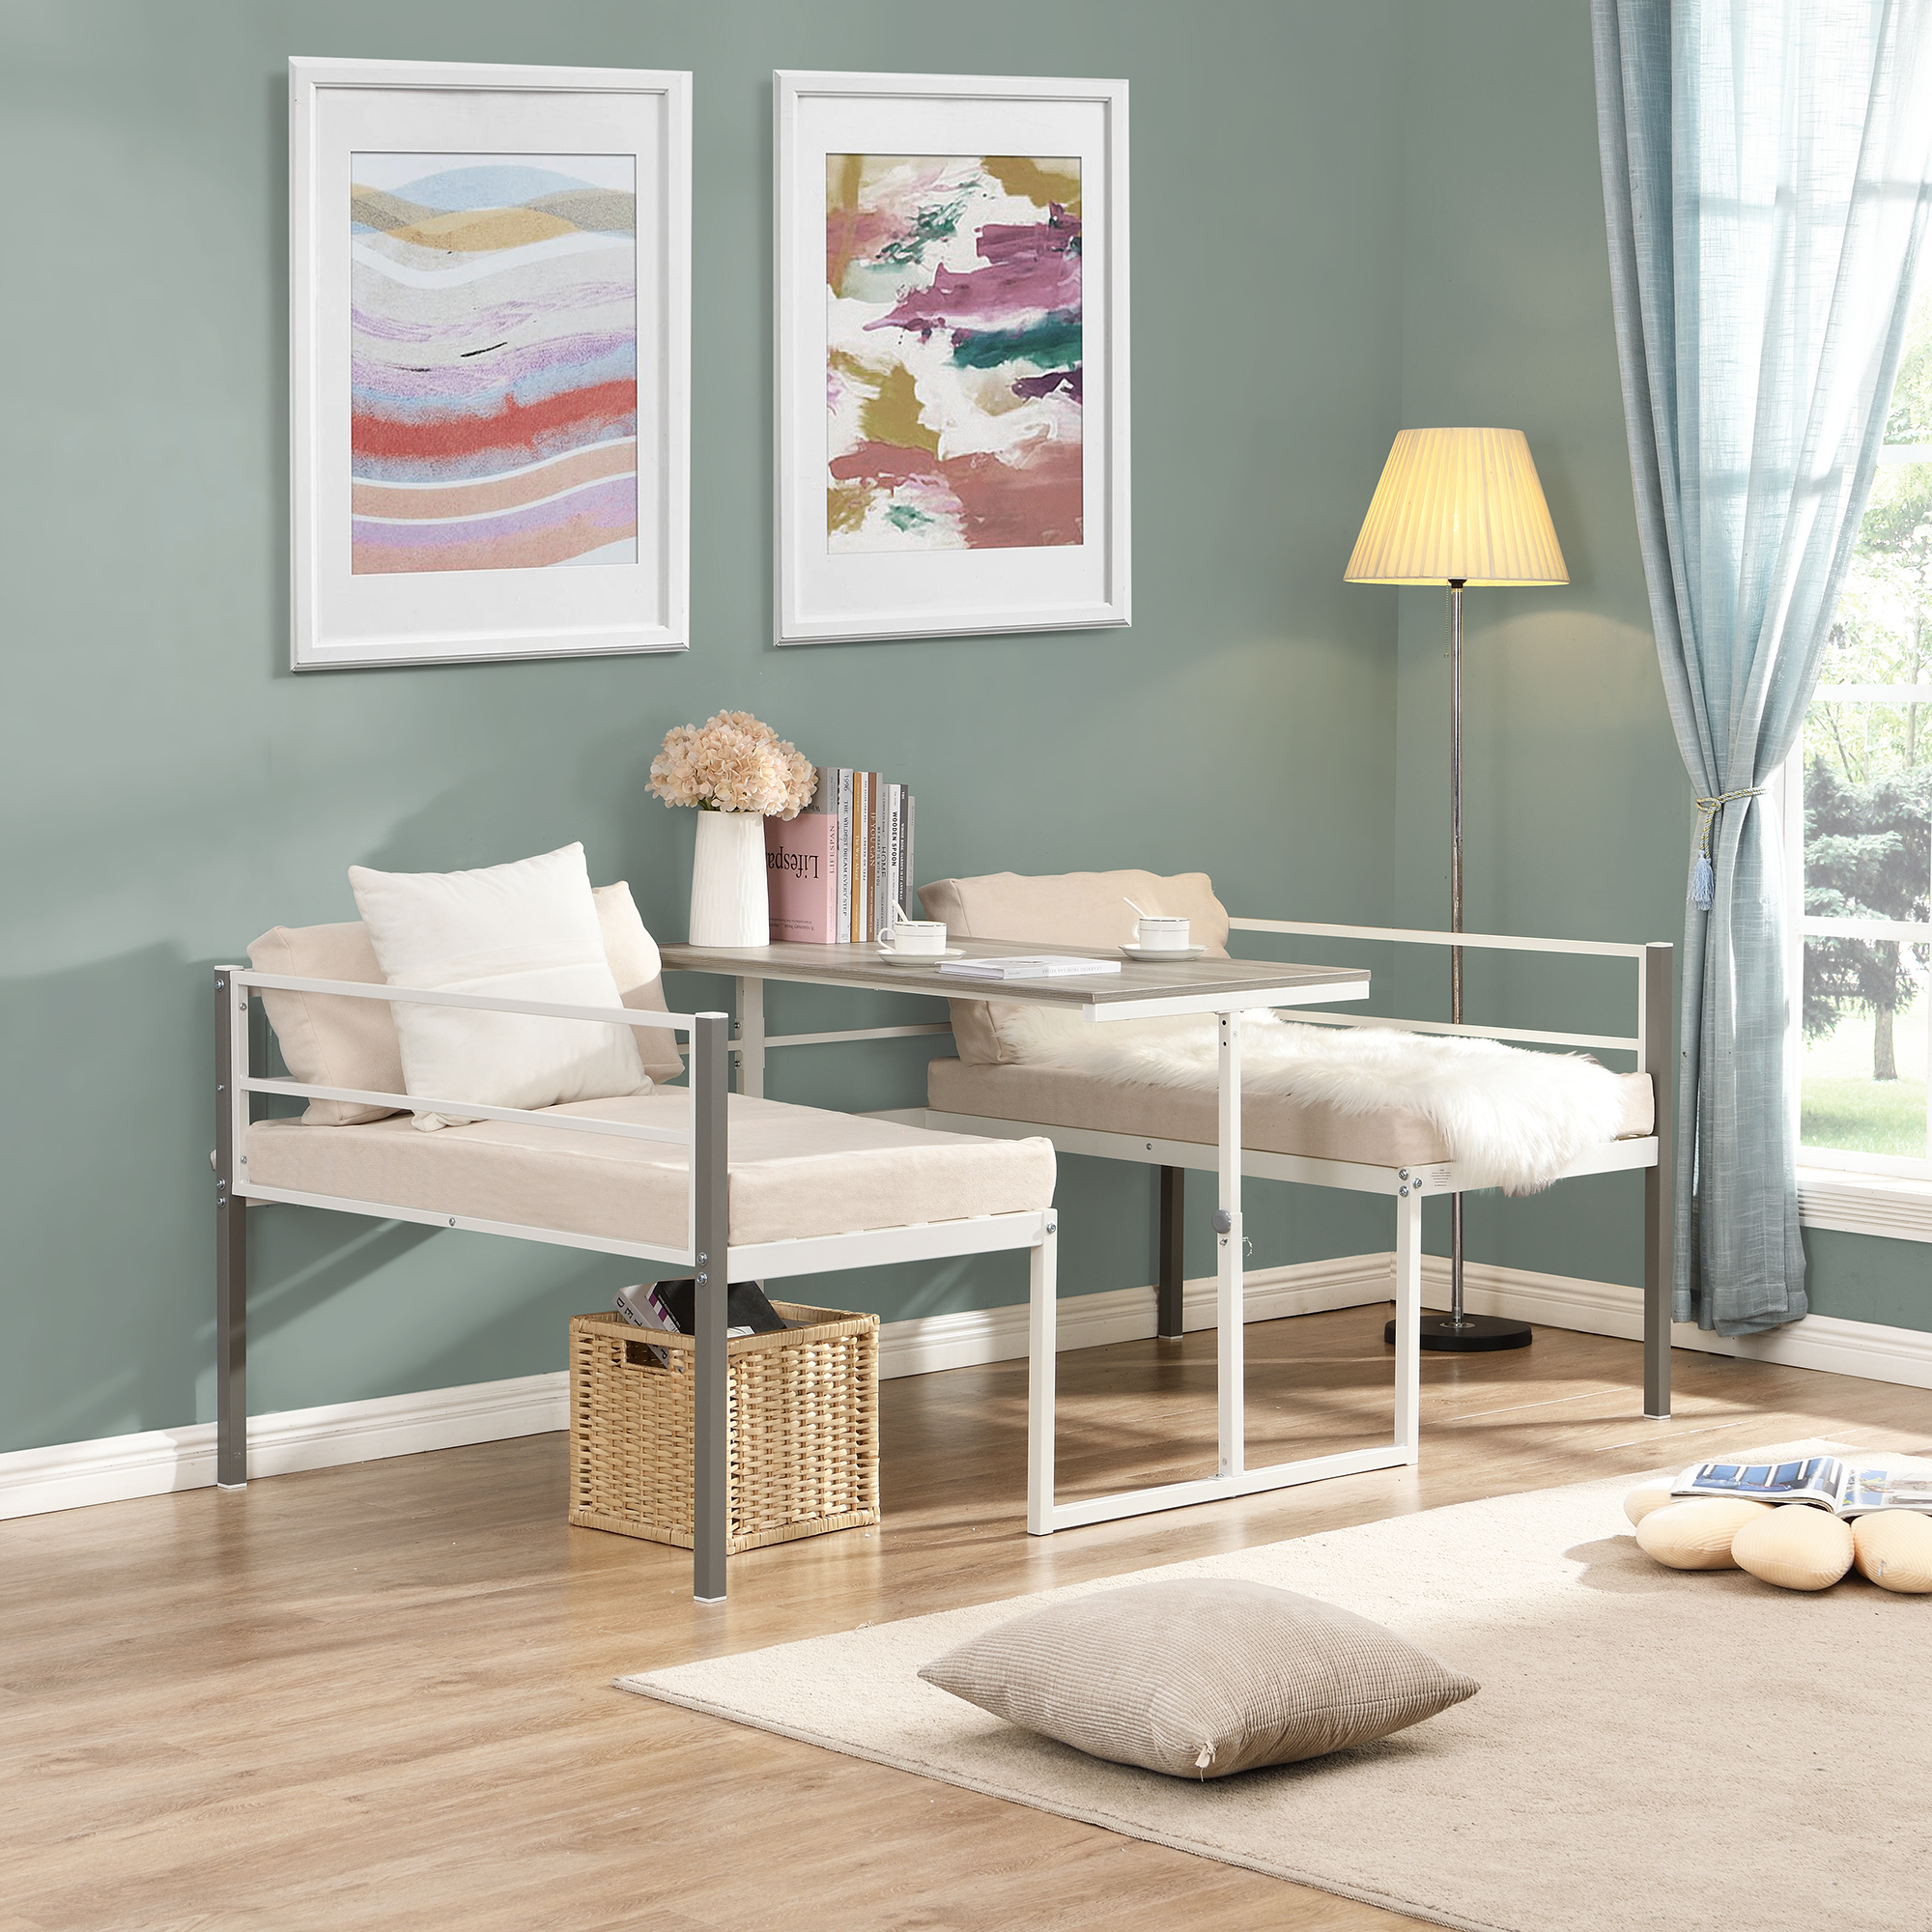 Twin Size Adjustable Metal Daybed with Built-in-Desk can be Raised and Lowered , White-Boyel Living